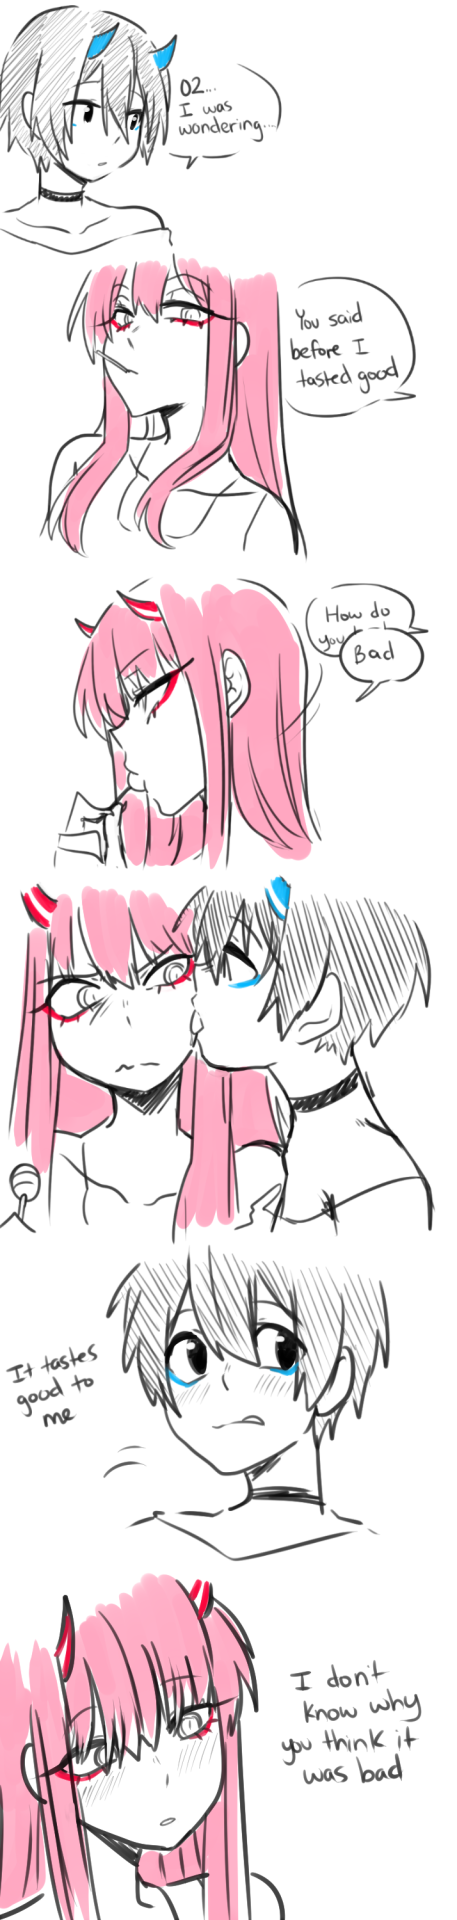 1boy 1girl black_hair blush candy colored comic couple darling_in_the_franxx face_licking food hiro_(darling_in_the_franxx) holding_lollipop horns licking lipstick lollipop long_hair makeup oni_horns pink_hair pride-kun red_horns short_hair speech_bubble zero_two_(darling_in_the_franxx)